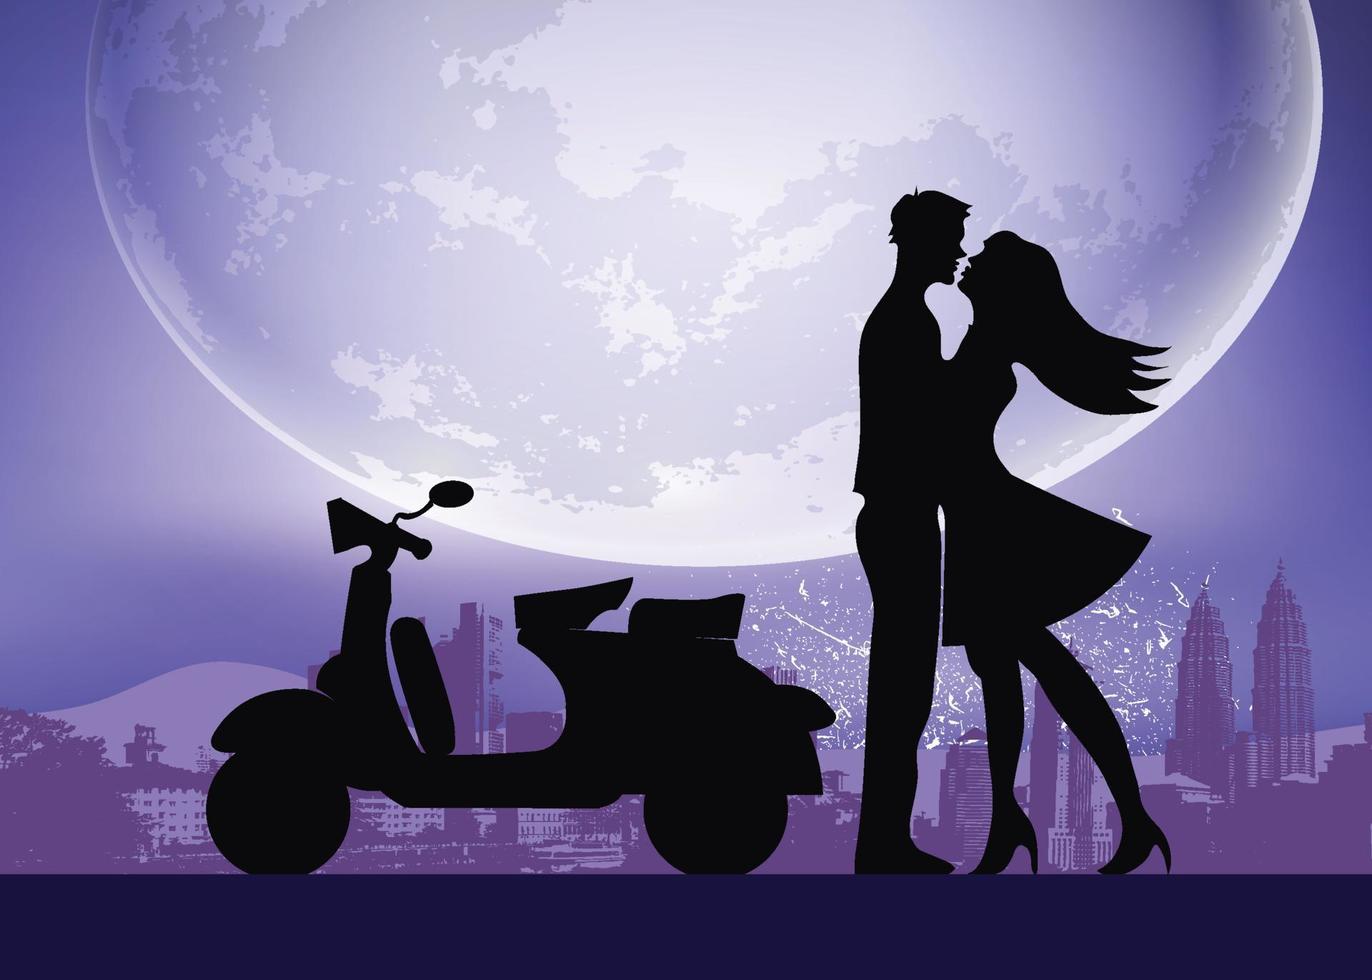 Lovers Silhouette Kissing at Moonlight vector